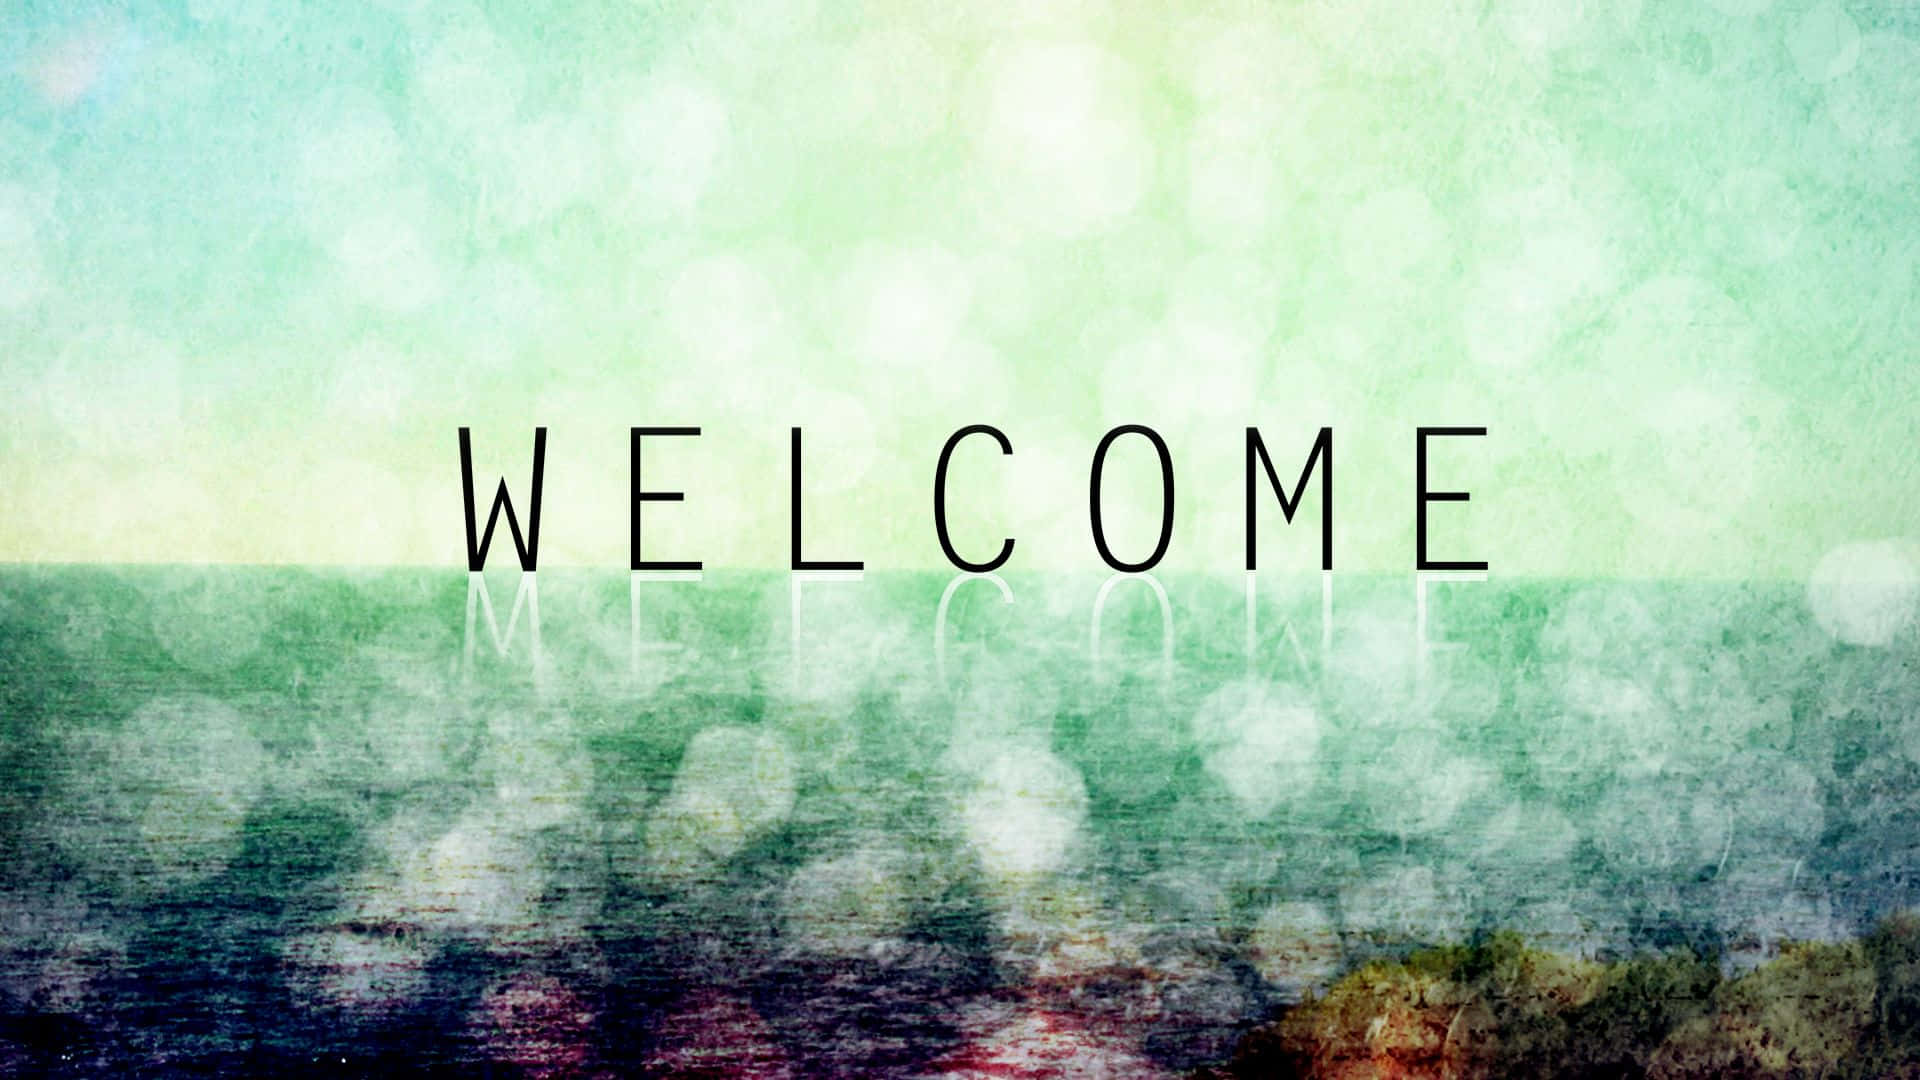 Welcome Background Images  Free Download on Freepik